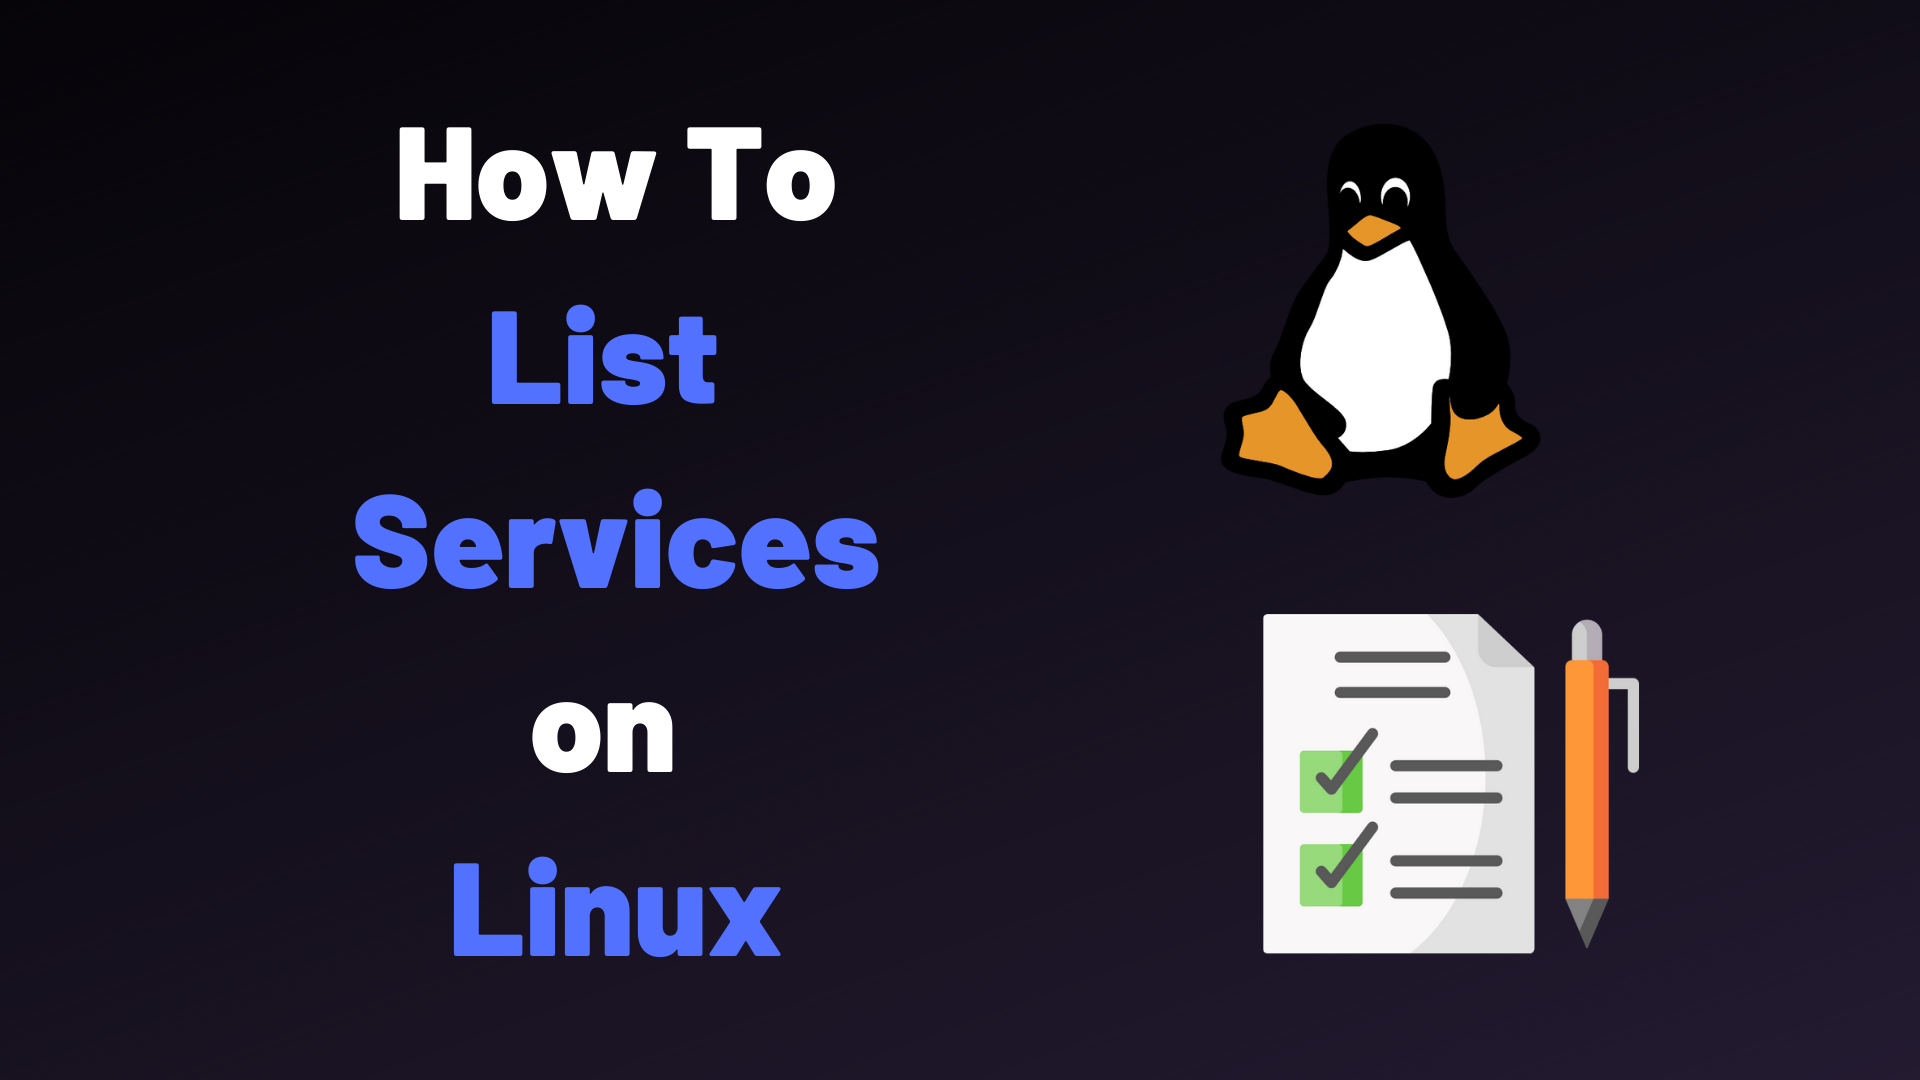 How To List Services on Linux